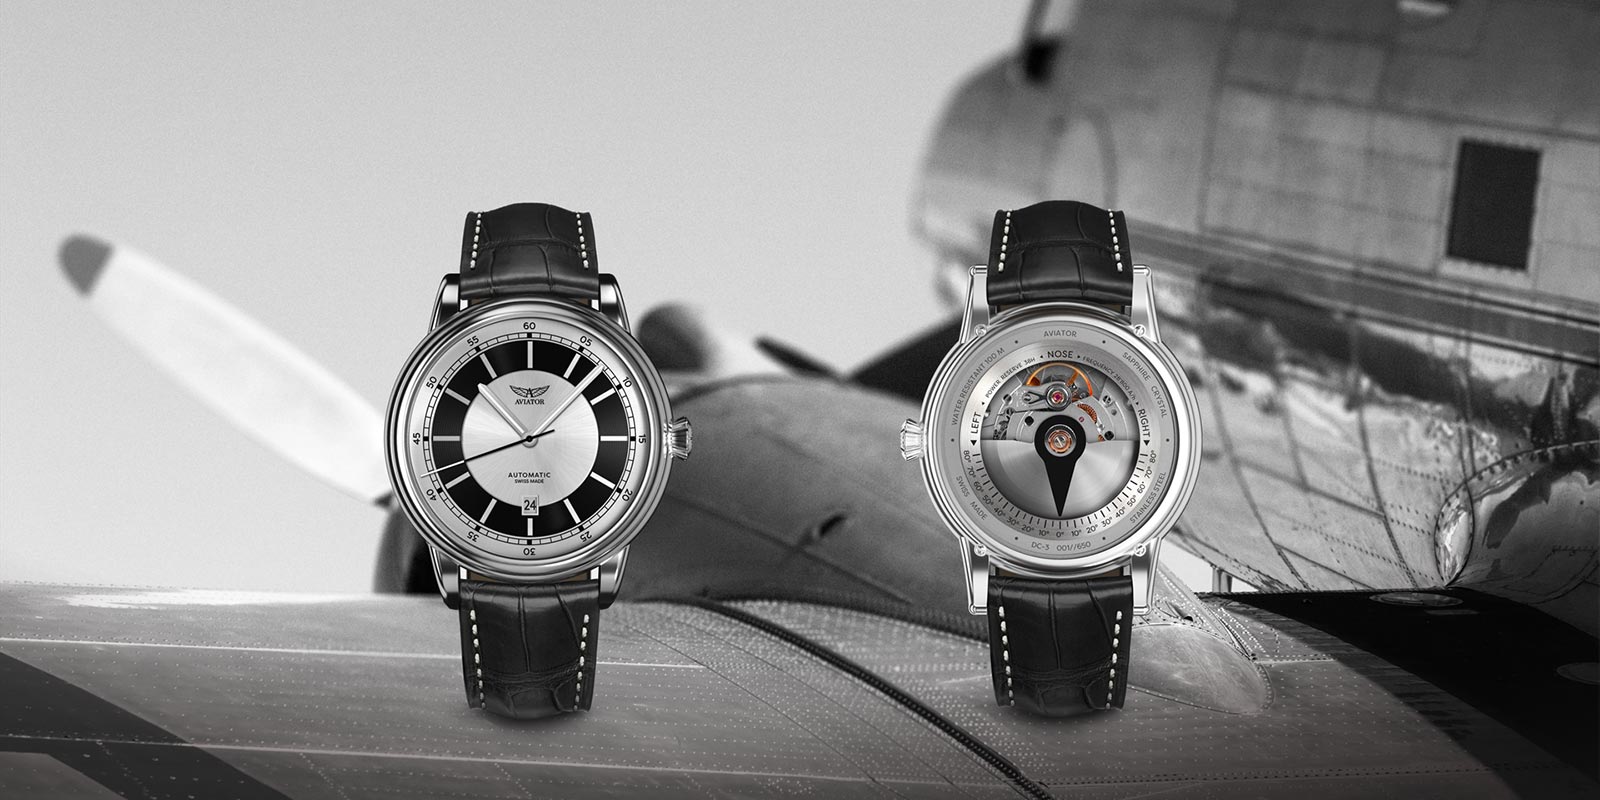 AVIATOR Watch Airacobra Collection of Pilot Watches